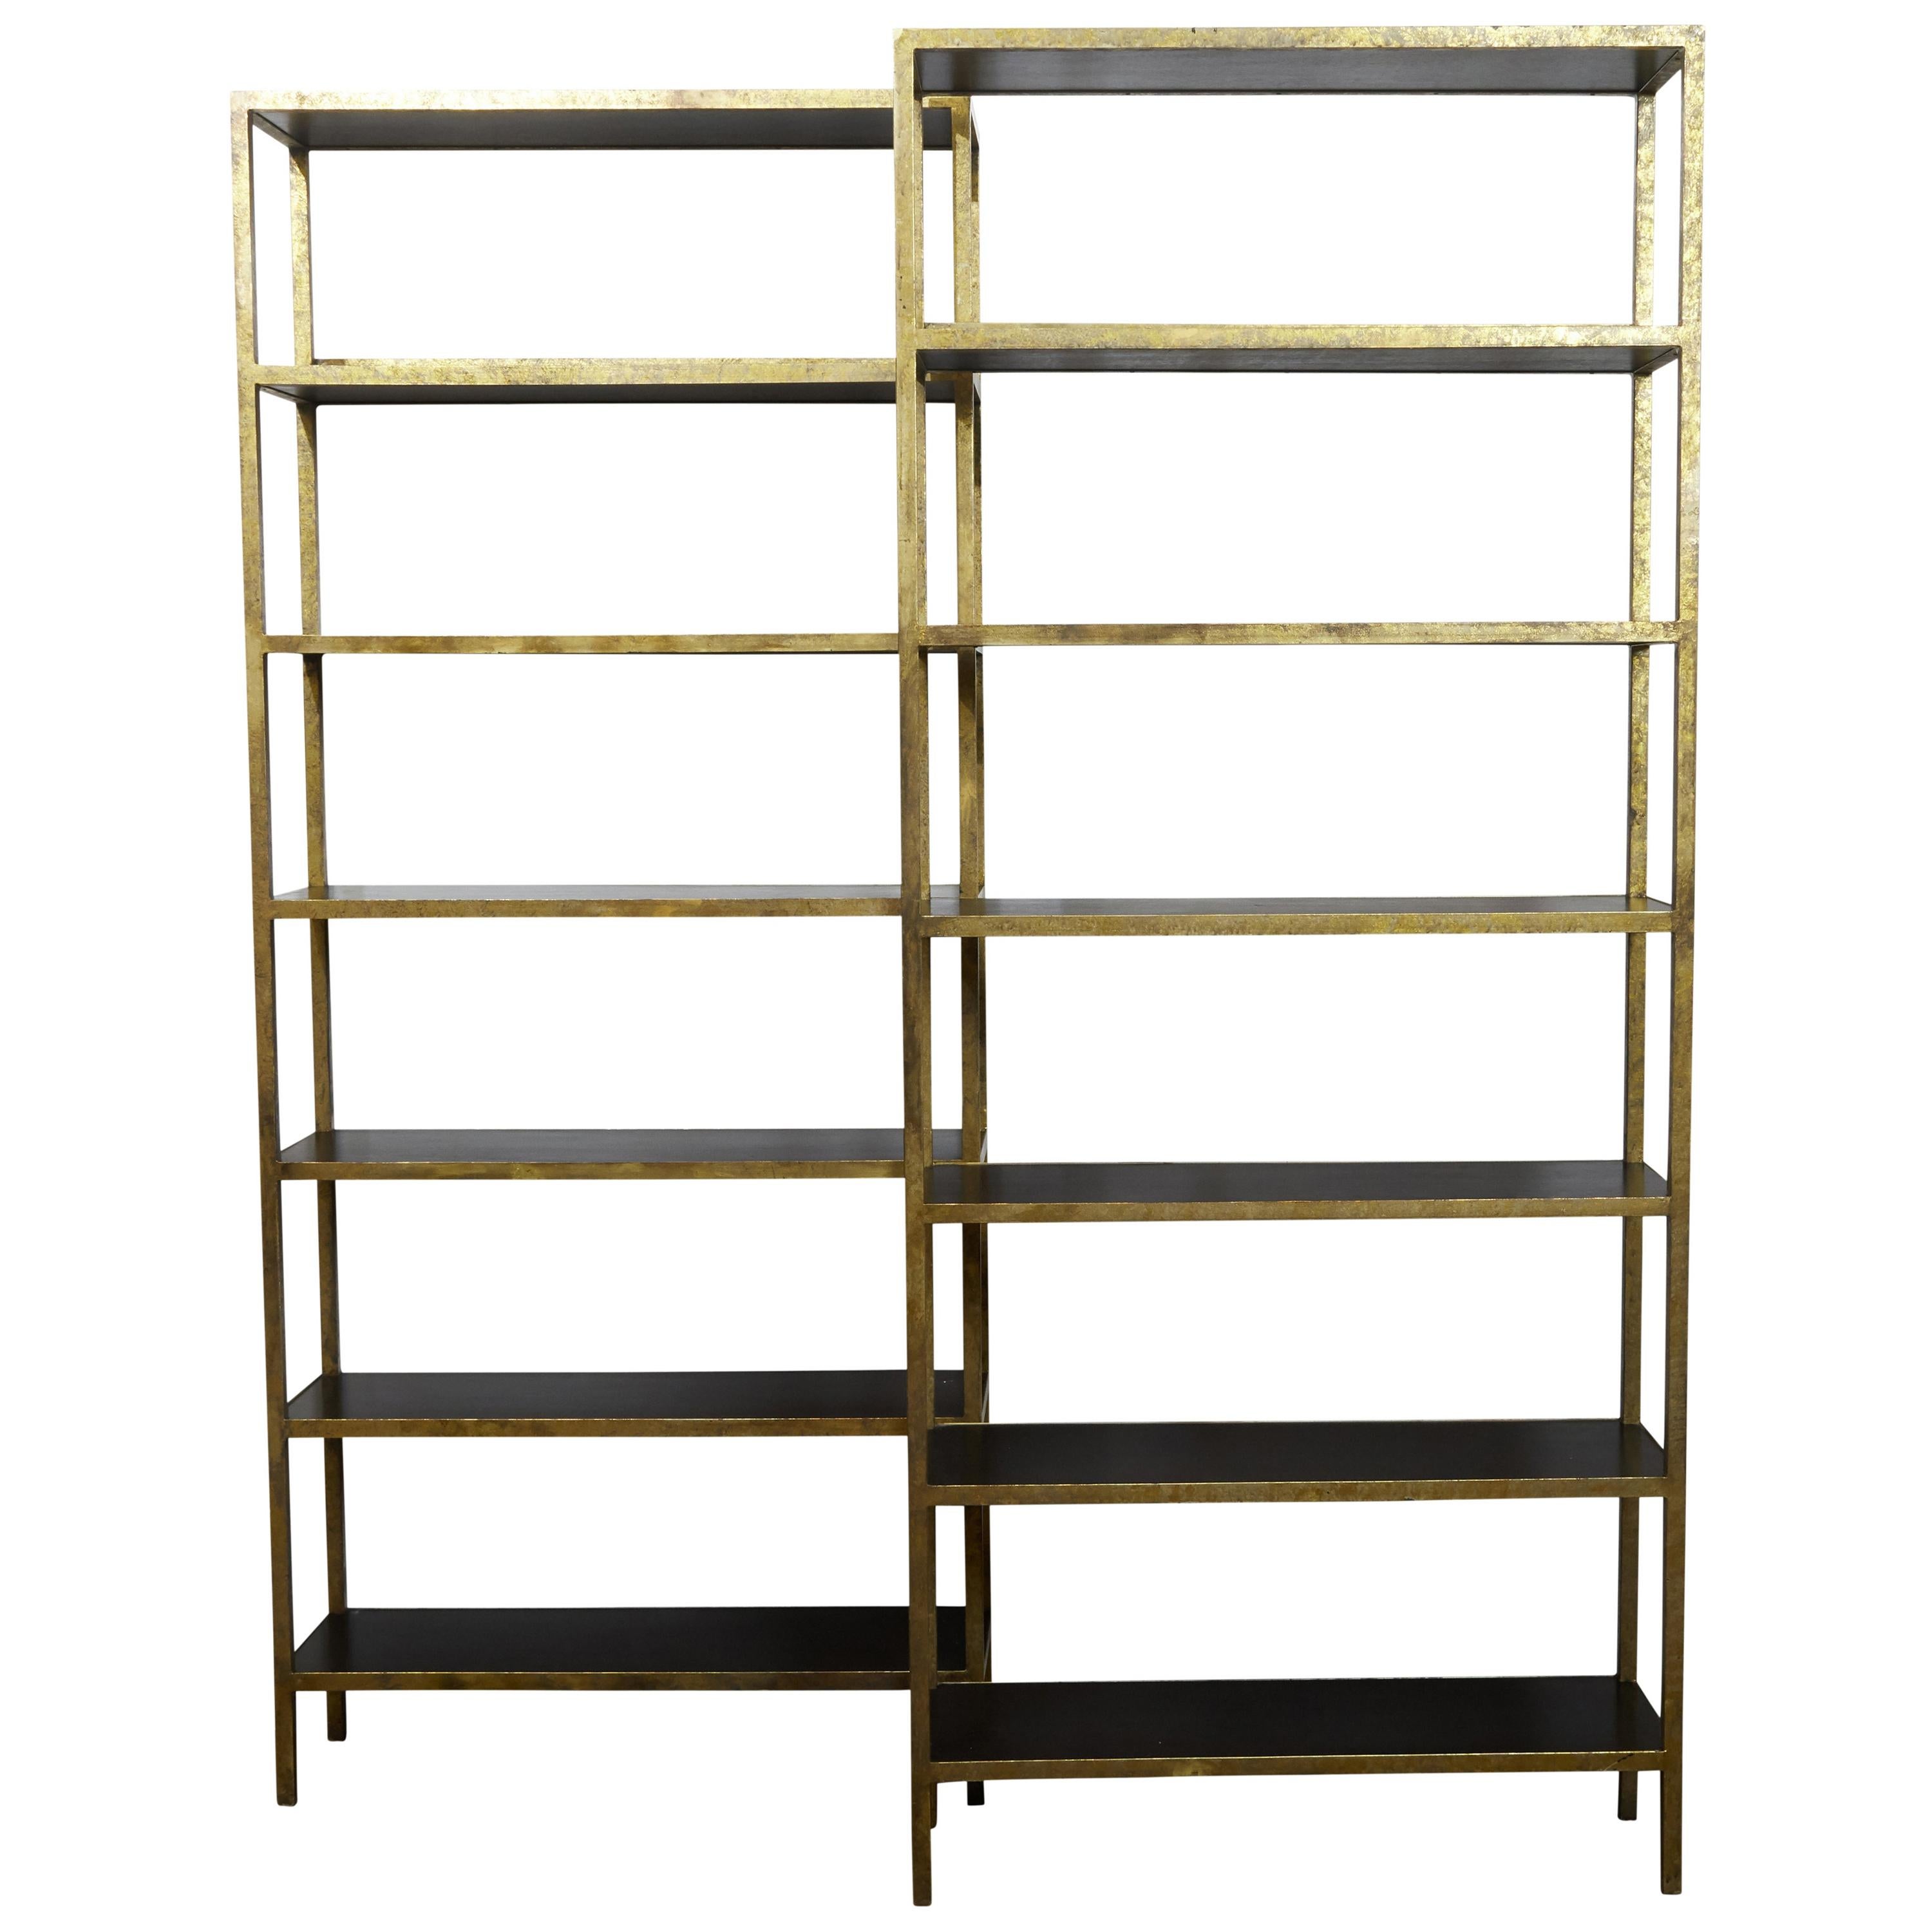 Pair of Gilt Metal Shelves from the Midcentury with Ebonized Wood Accents